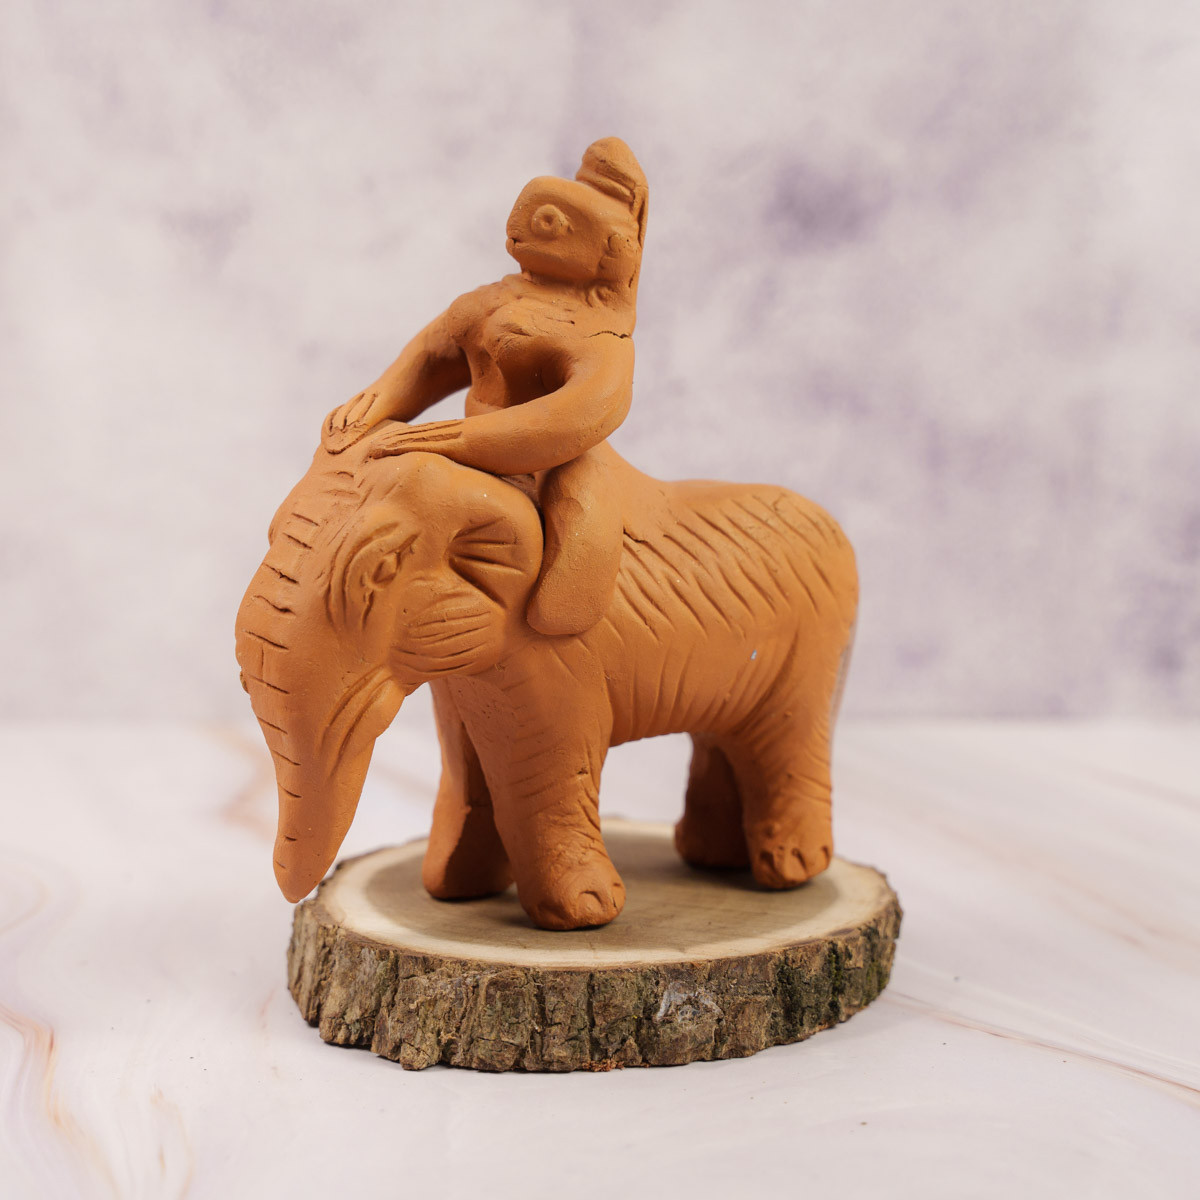 Terracotta Elephant with Rider